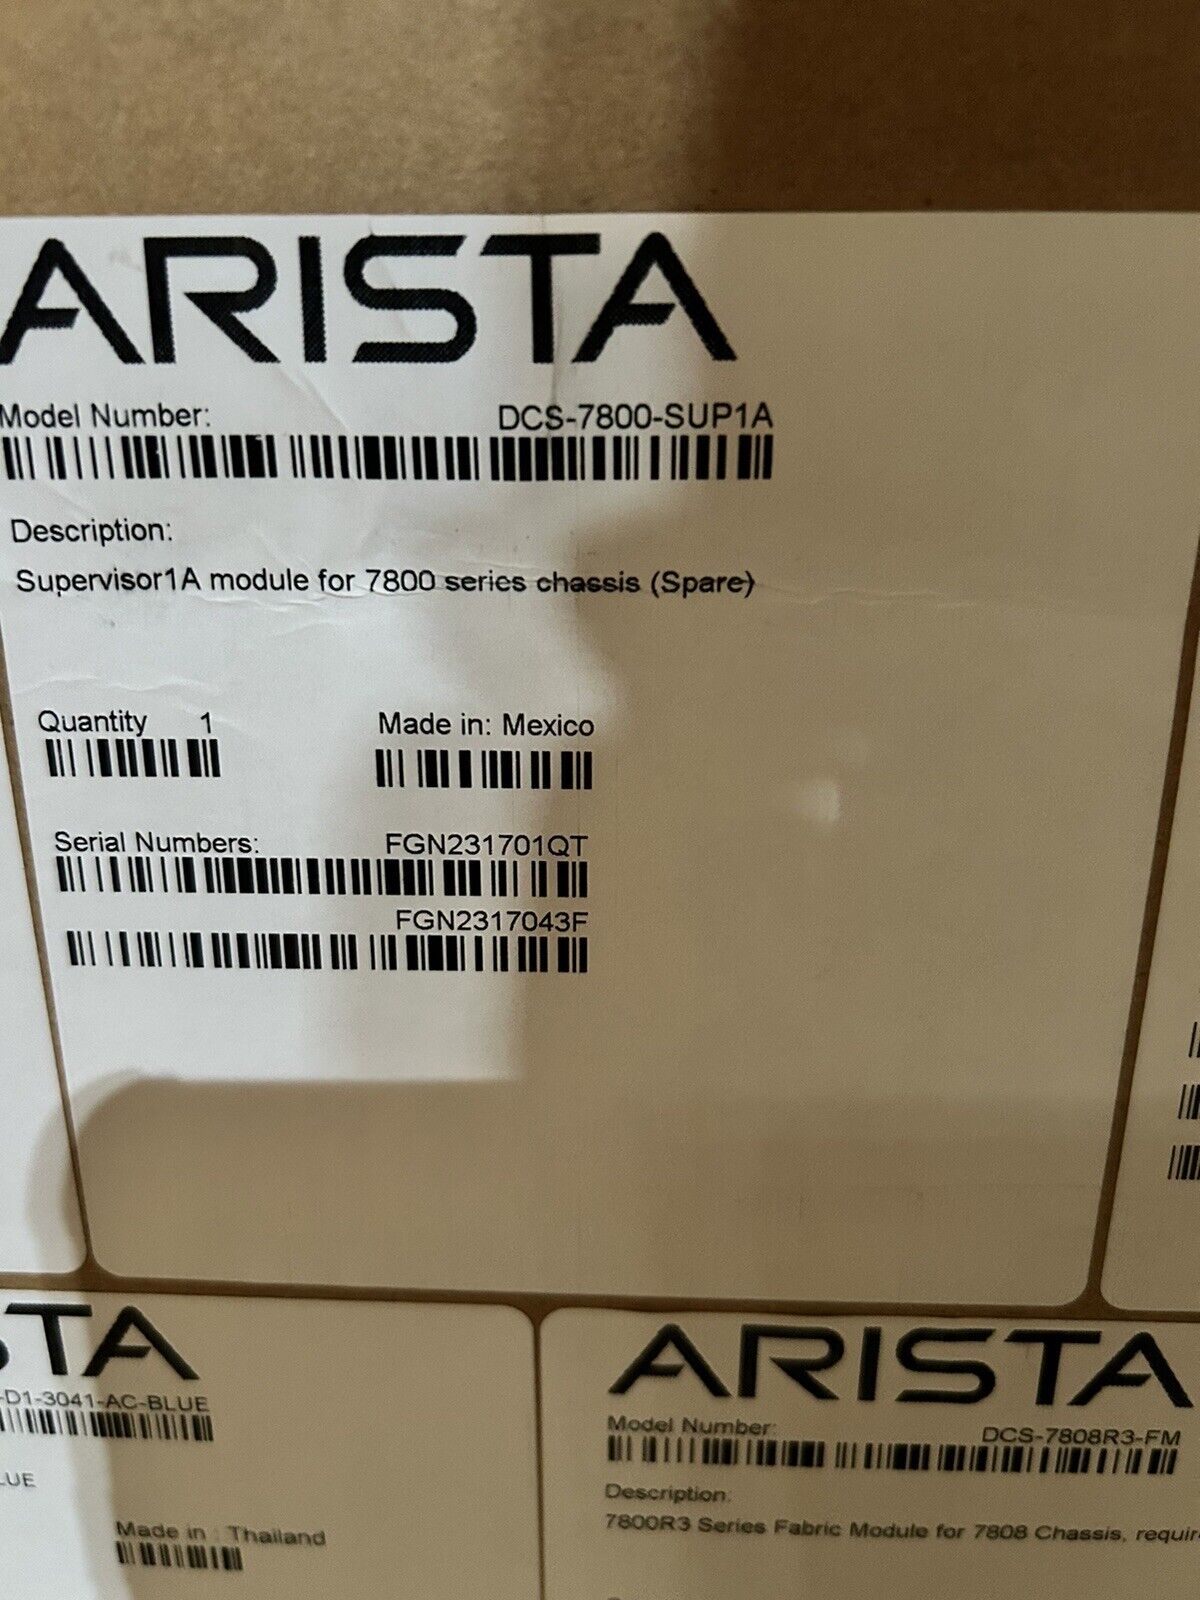 Arista DCS-7800-SUP1A ASY-55228-103 Supervisor1A Module for 7808 7804 Chassis